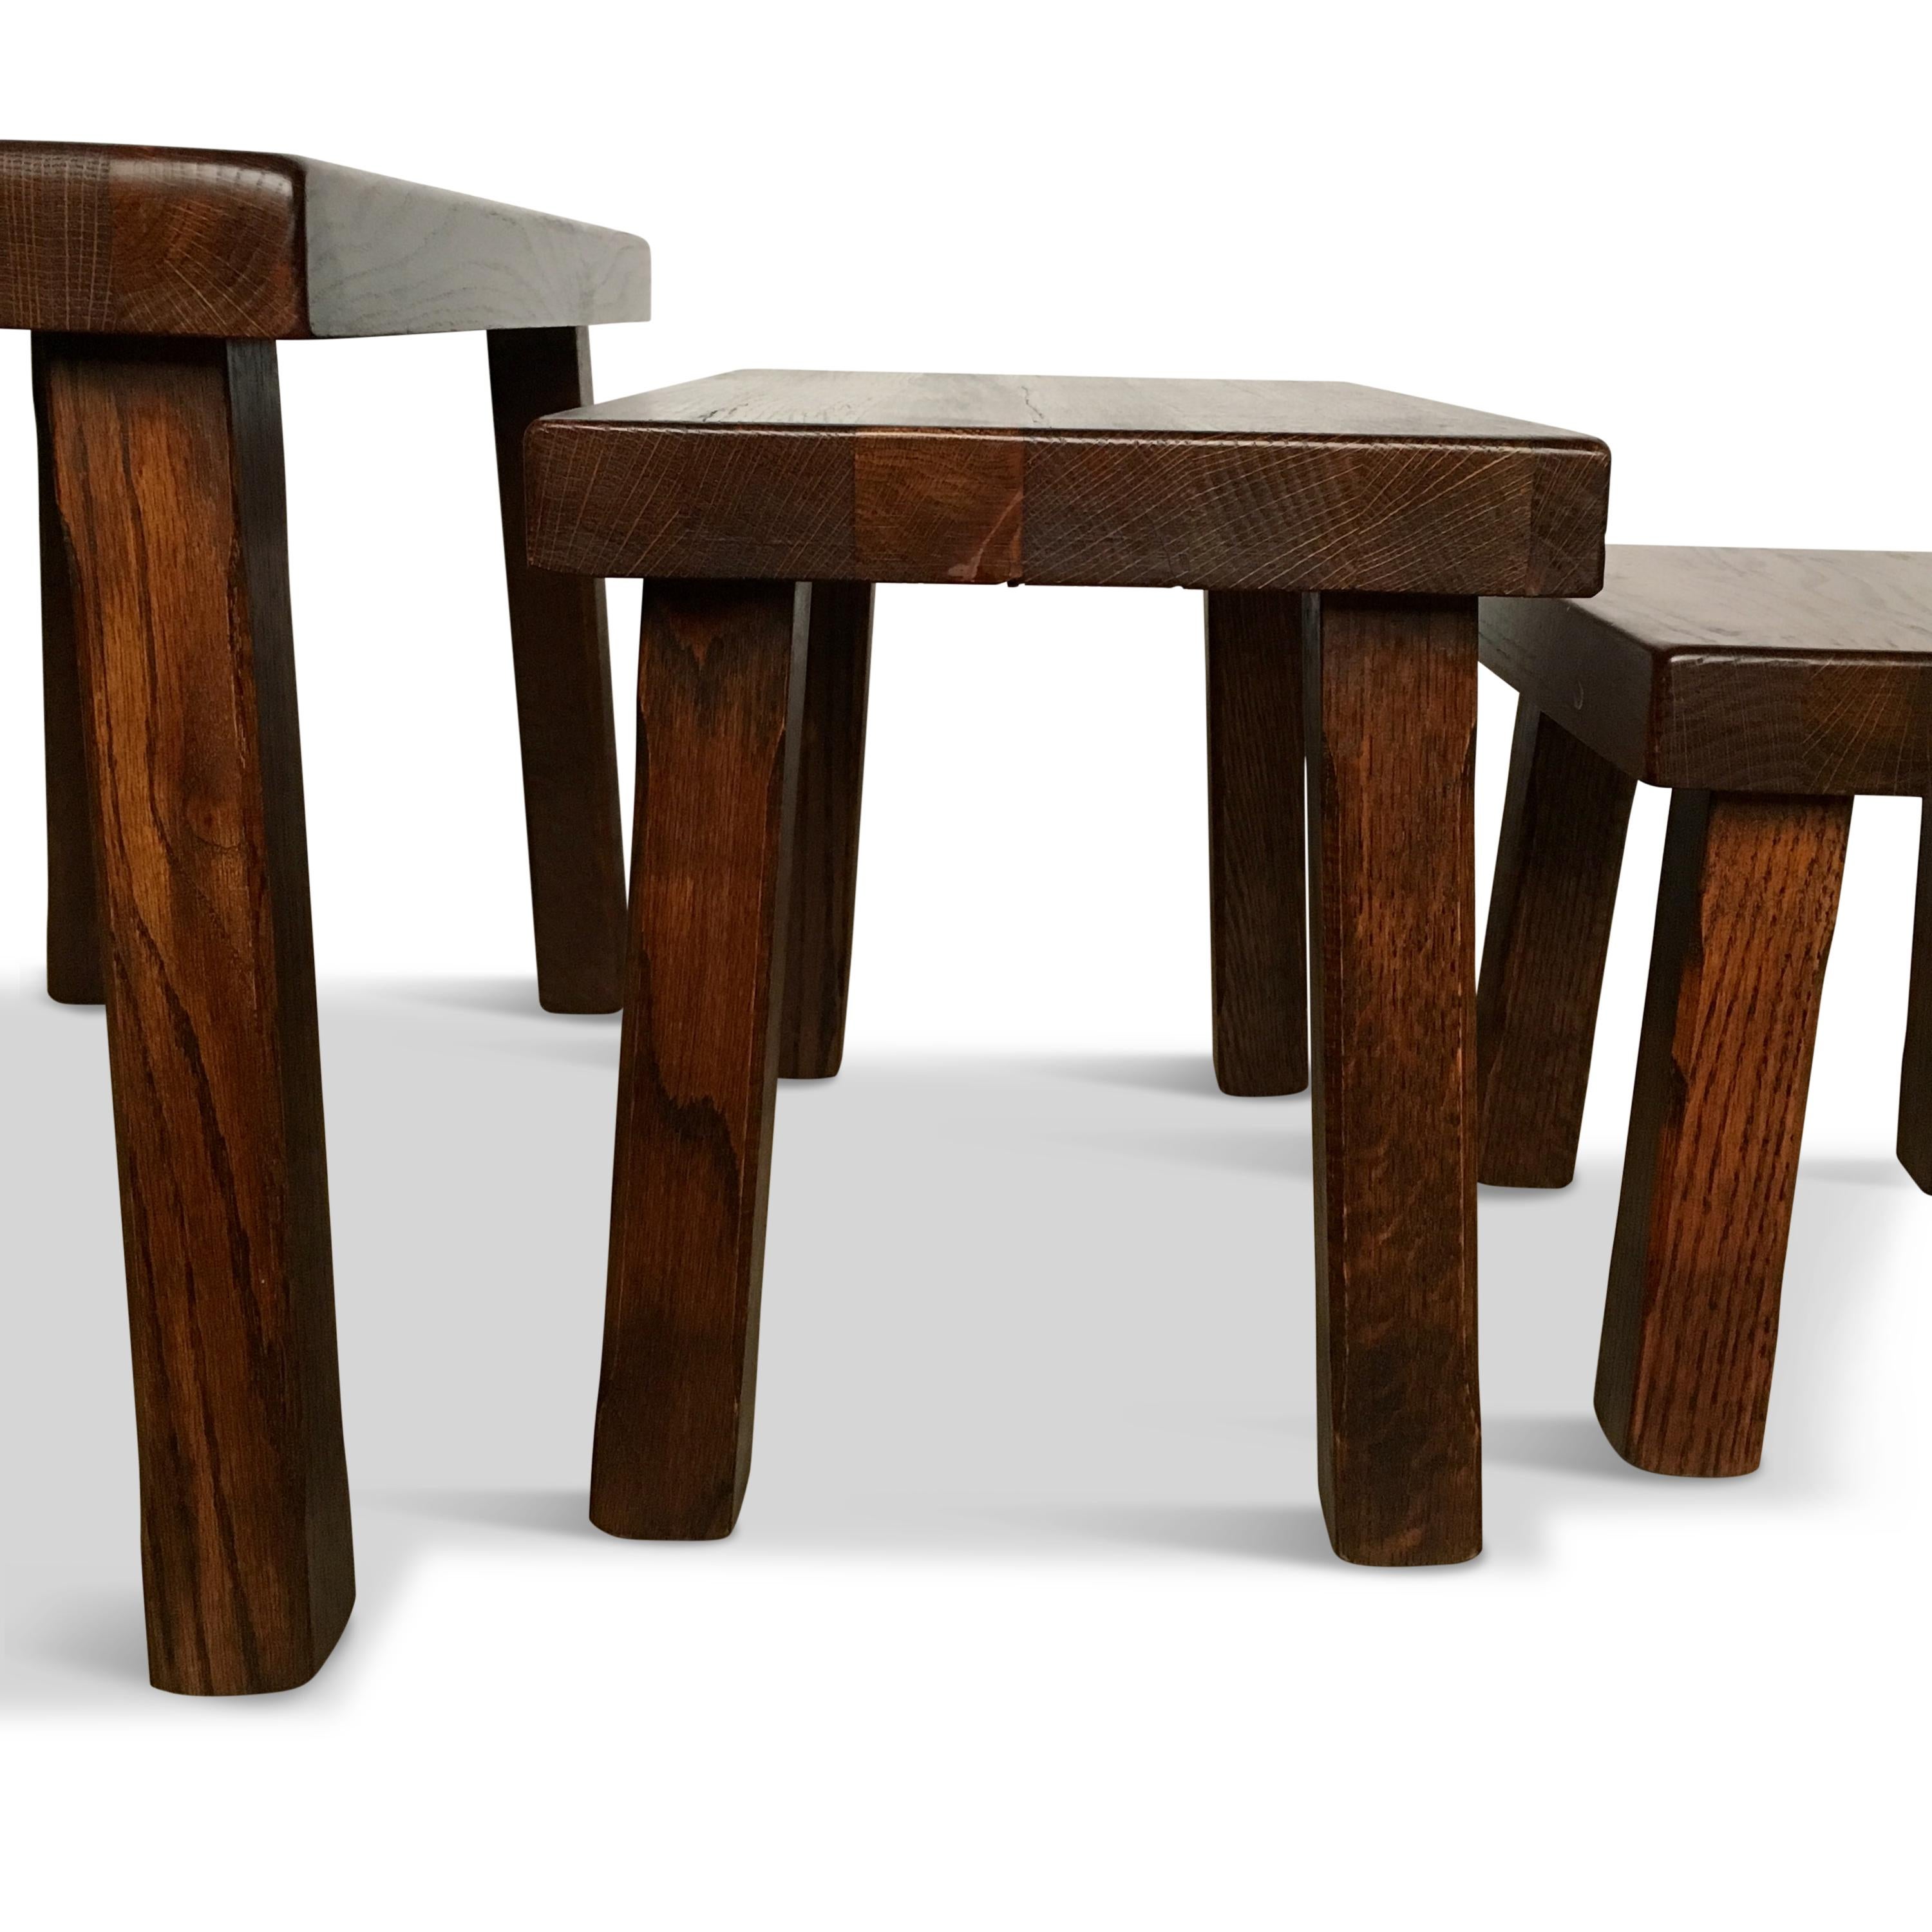 Set of Three Vintage Dutch Solid Oak Nesting Tables or Benches, 1970s For Sale 2